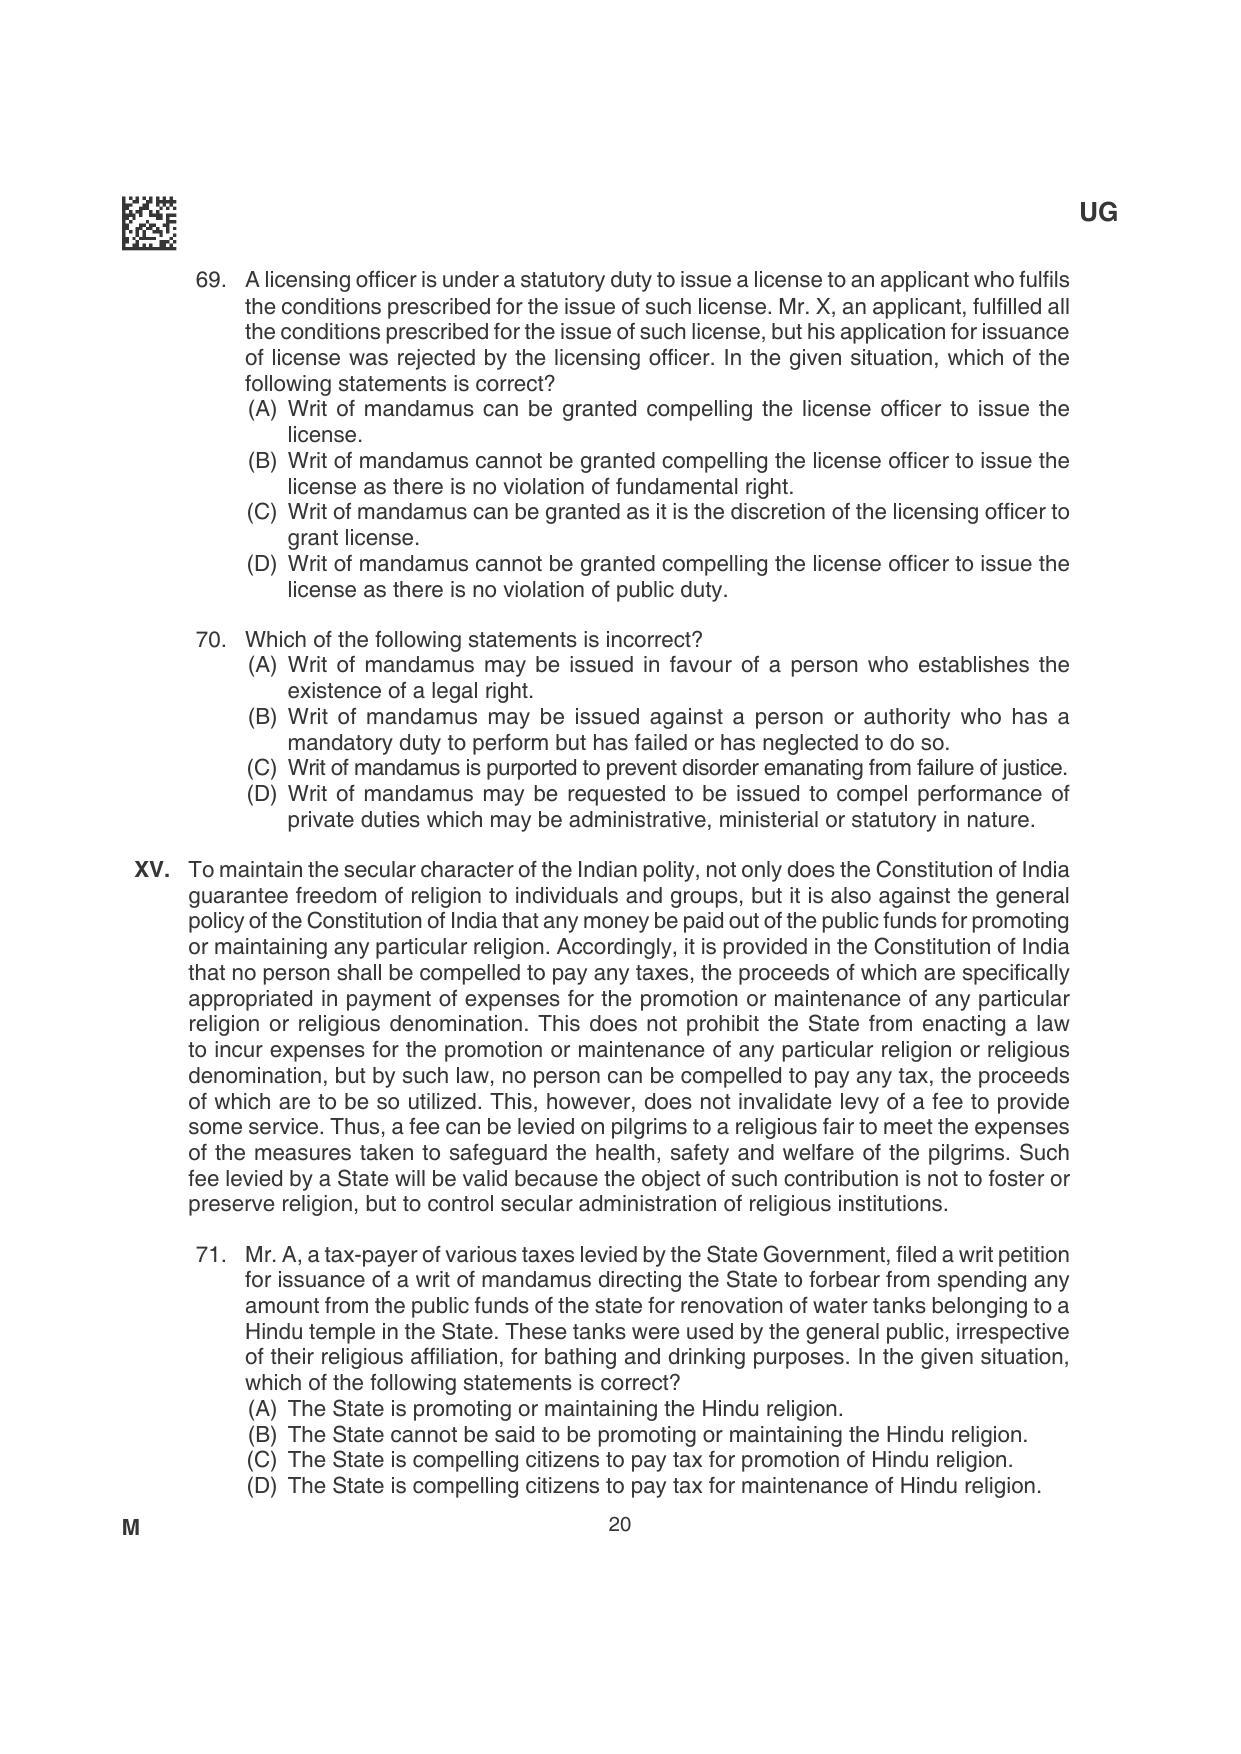 CLAT 2022 UG Question Papers - Page 20